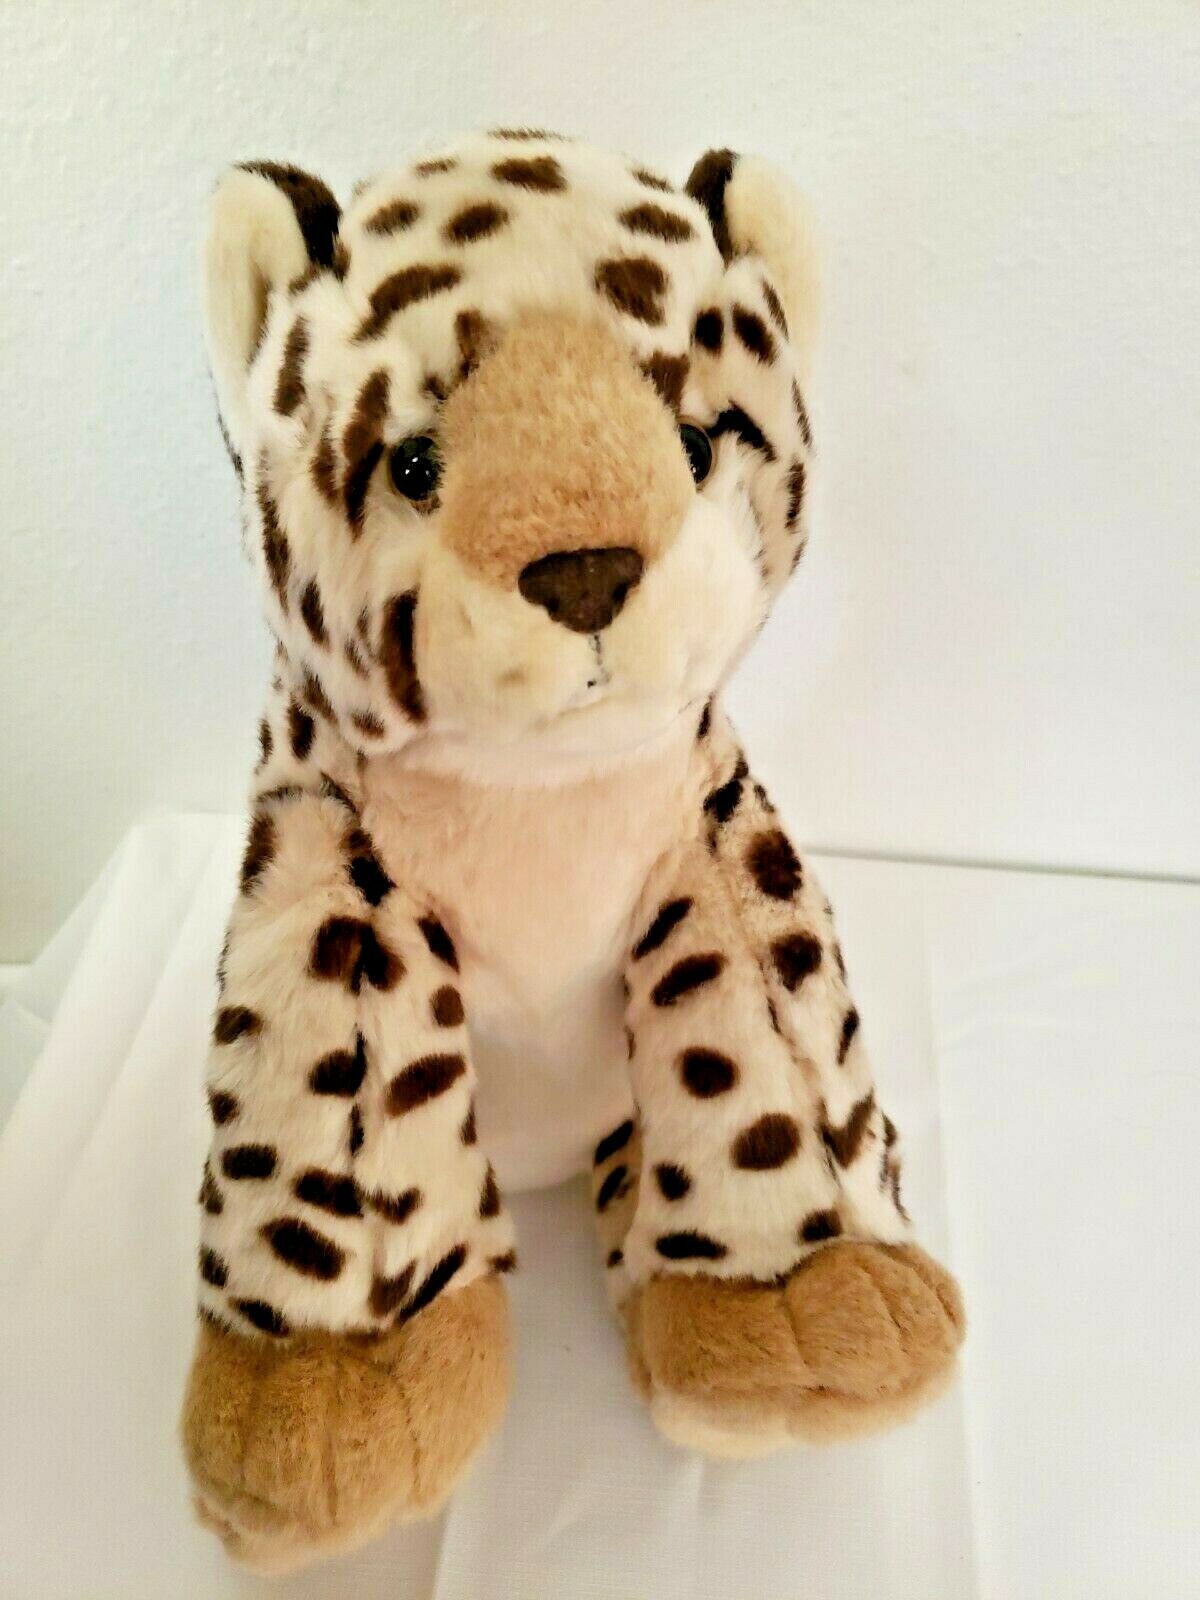 Build A Bear Baby Spotted Panther Cub Plush Stuffed Animal Gold Eyes Jaguar